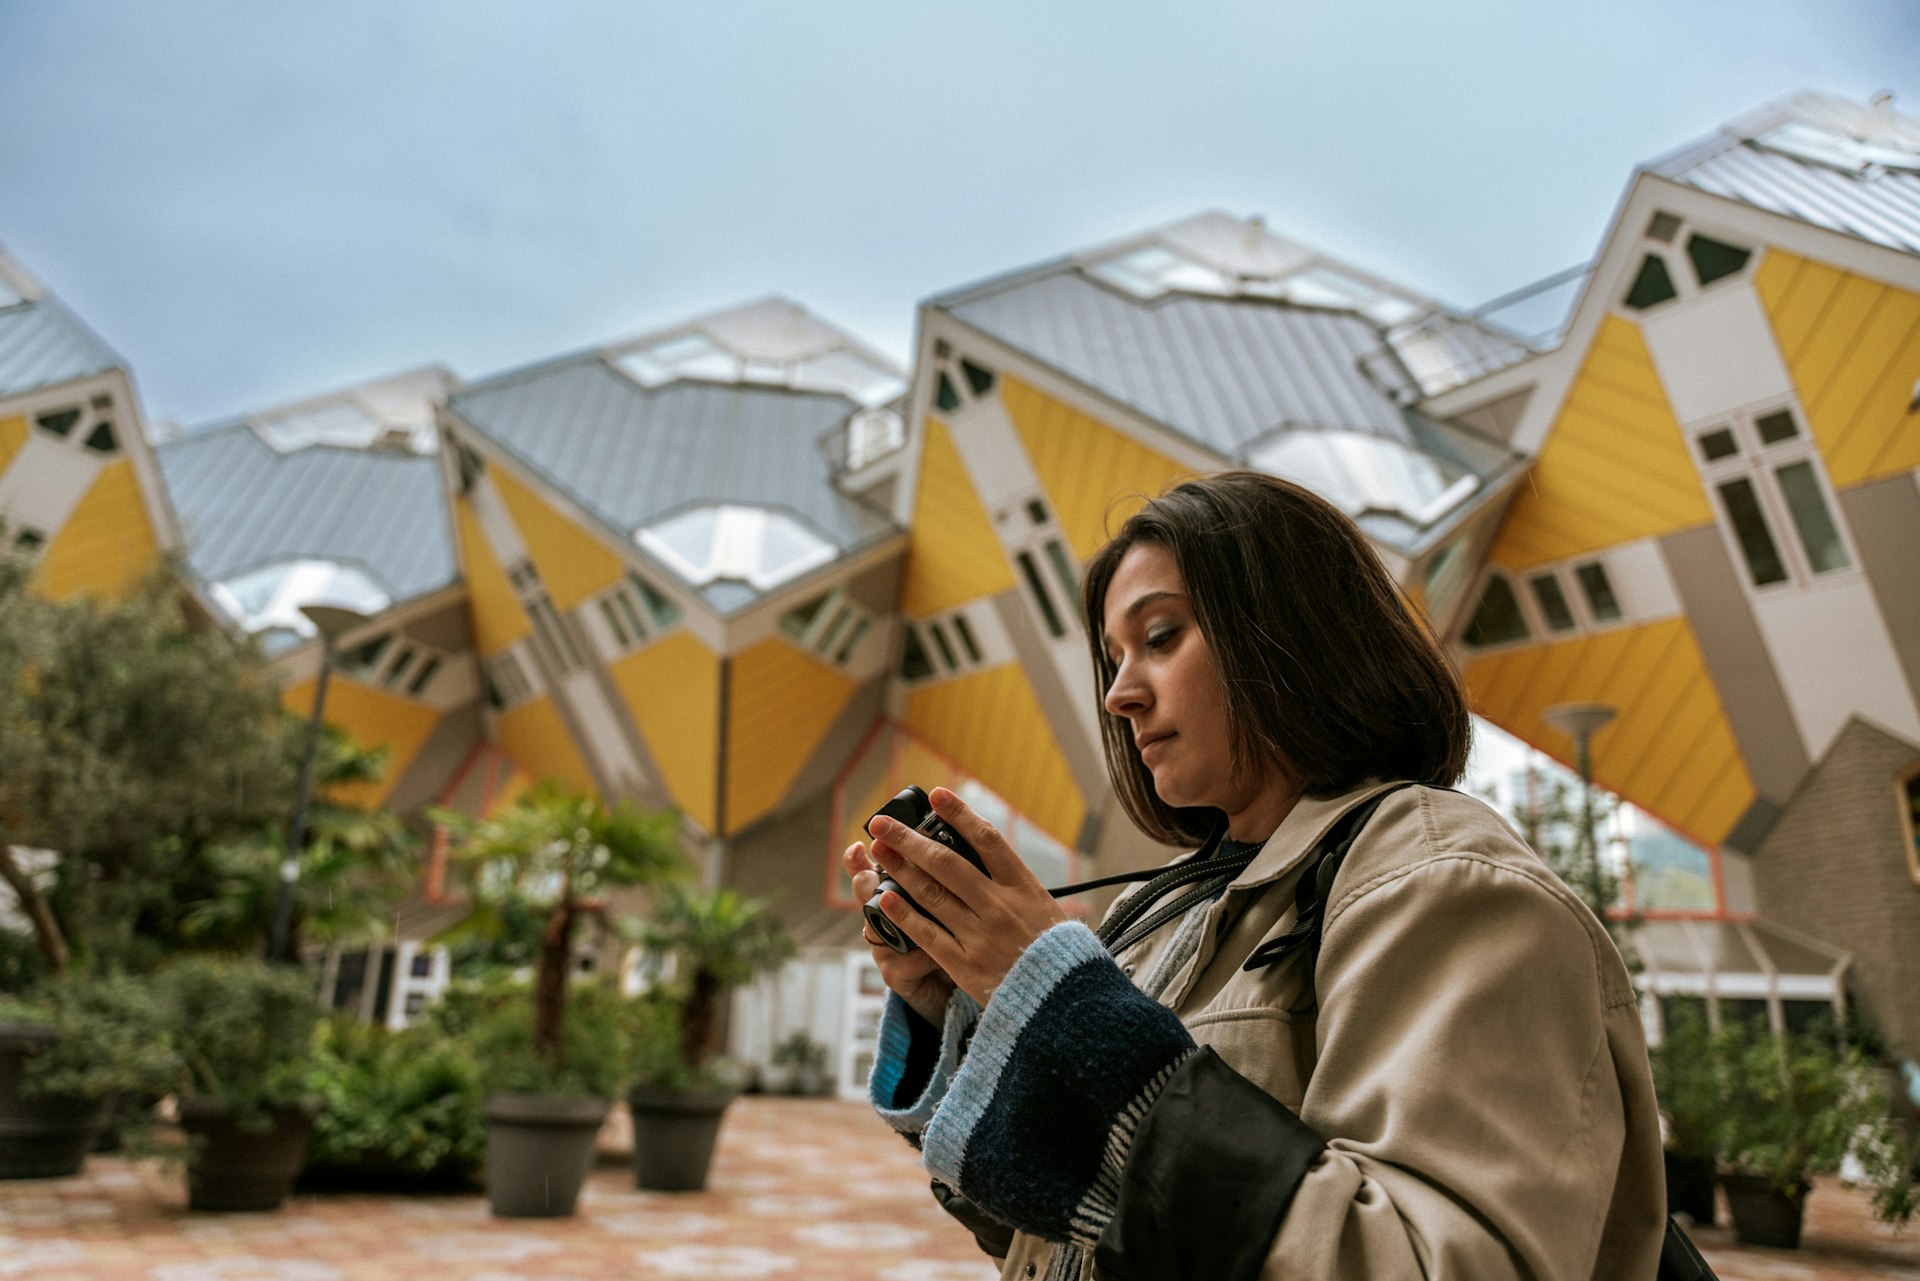 A woman with a camera in front of the yellow cube-like houses of the Overblaak Development, Rotterdam, the Netherlands